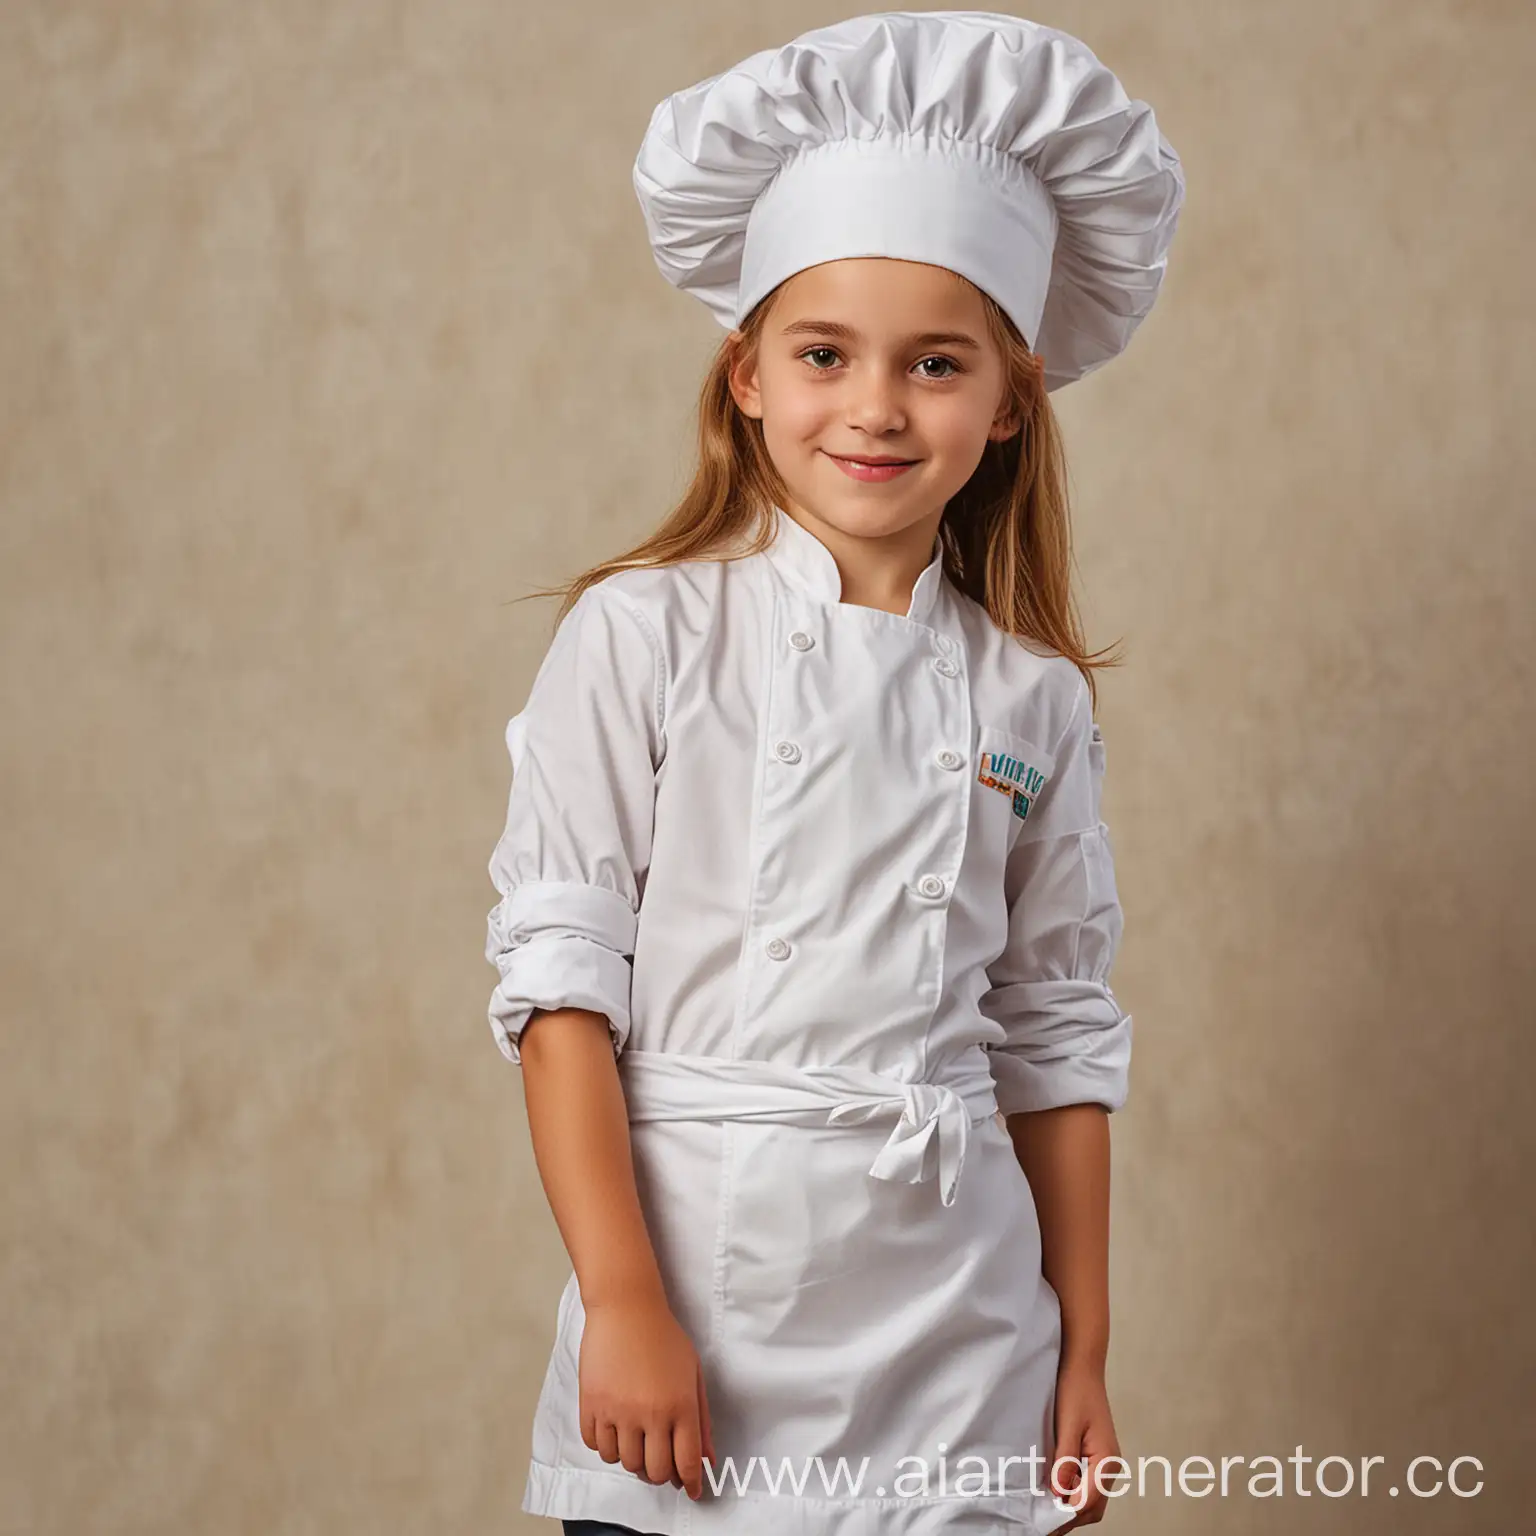 Young-Girl-in-Chefs-Hat-Making-Hinkali